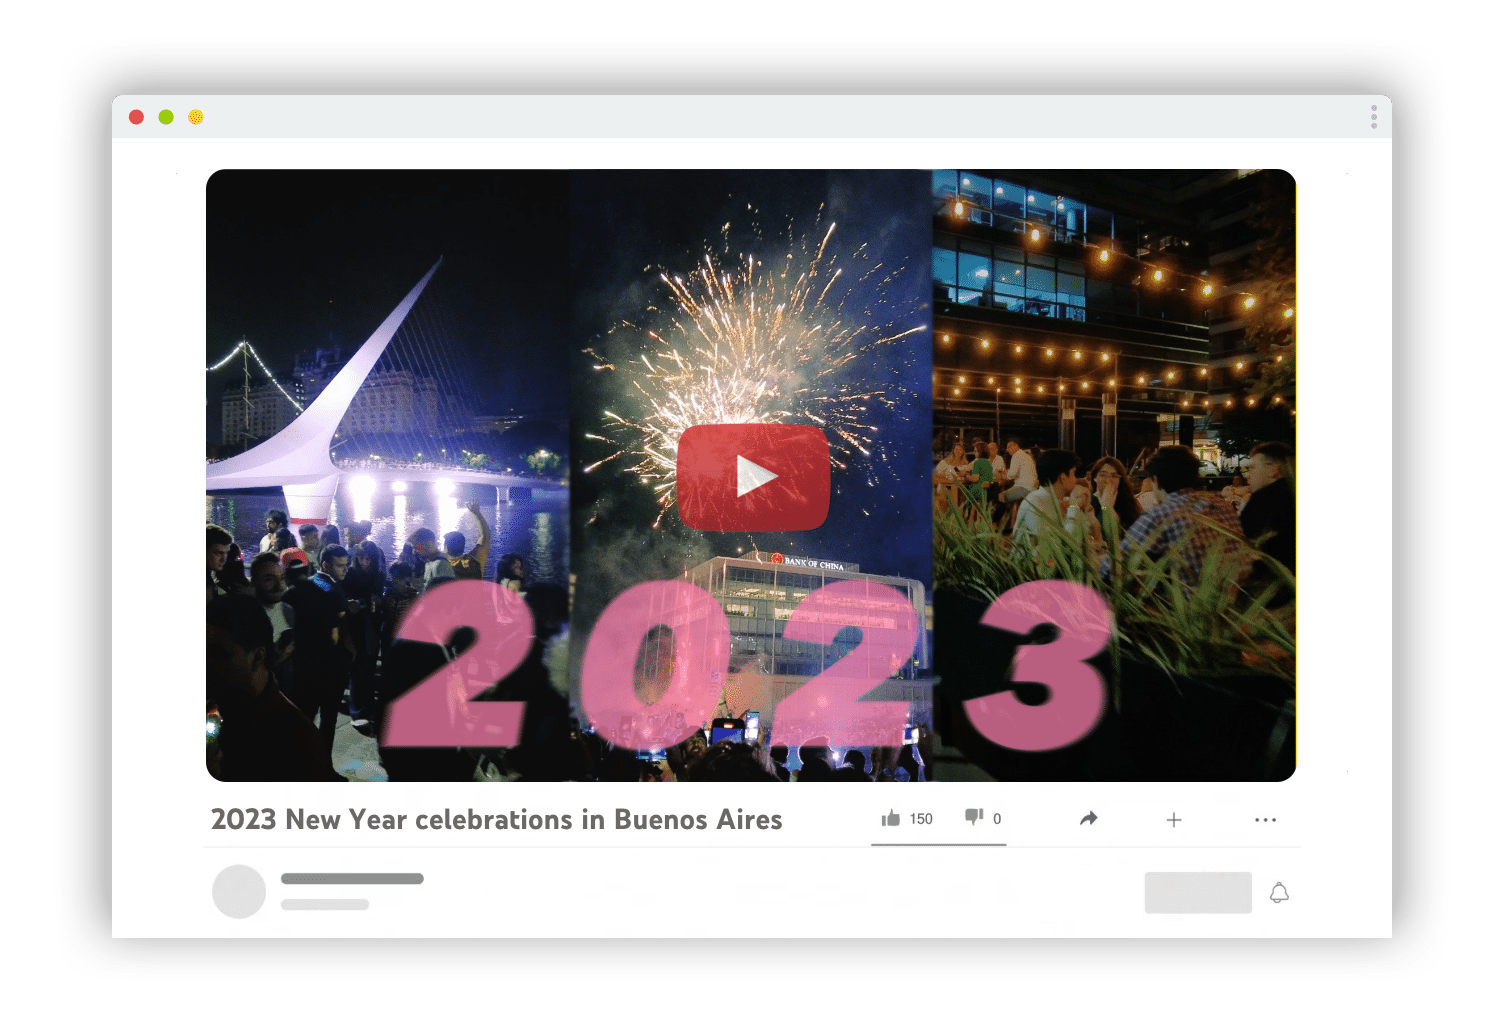 2023 New Year celebrations in Buenos Aires